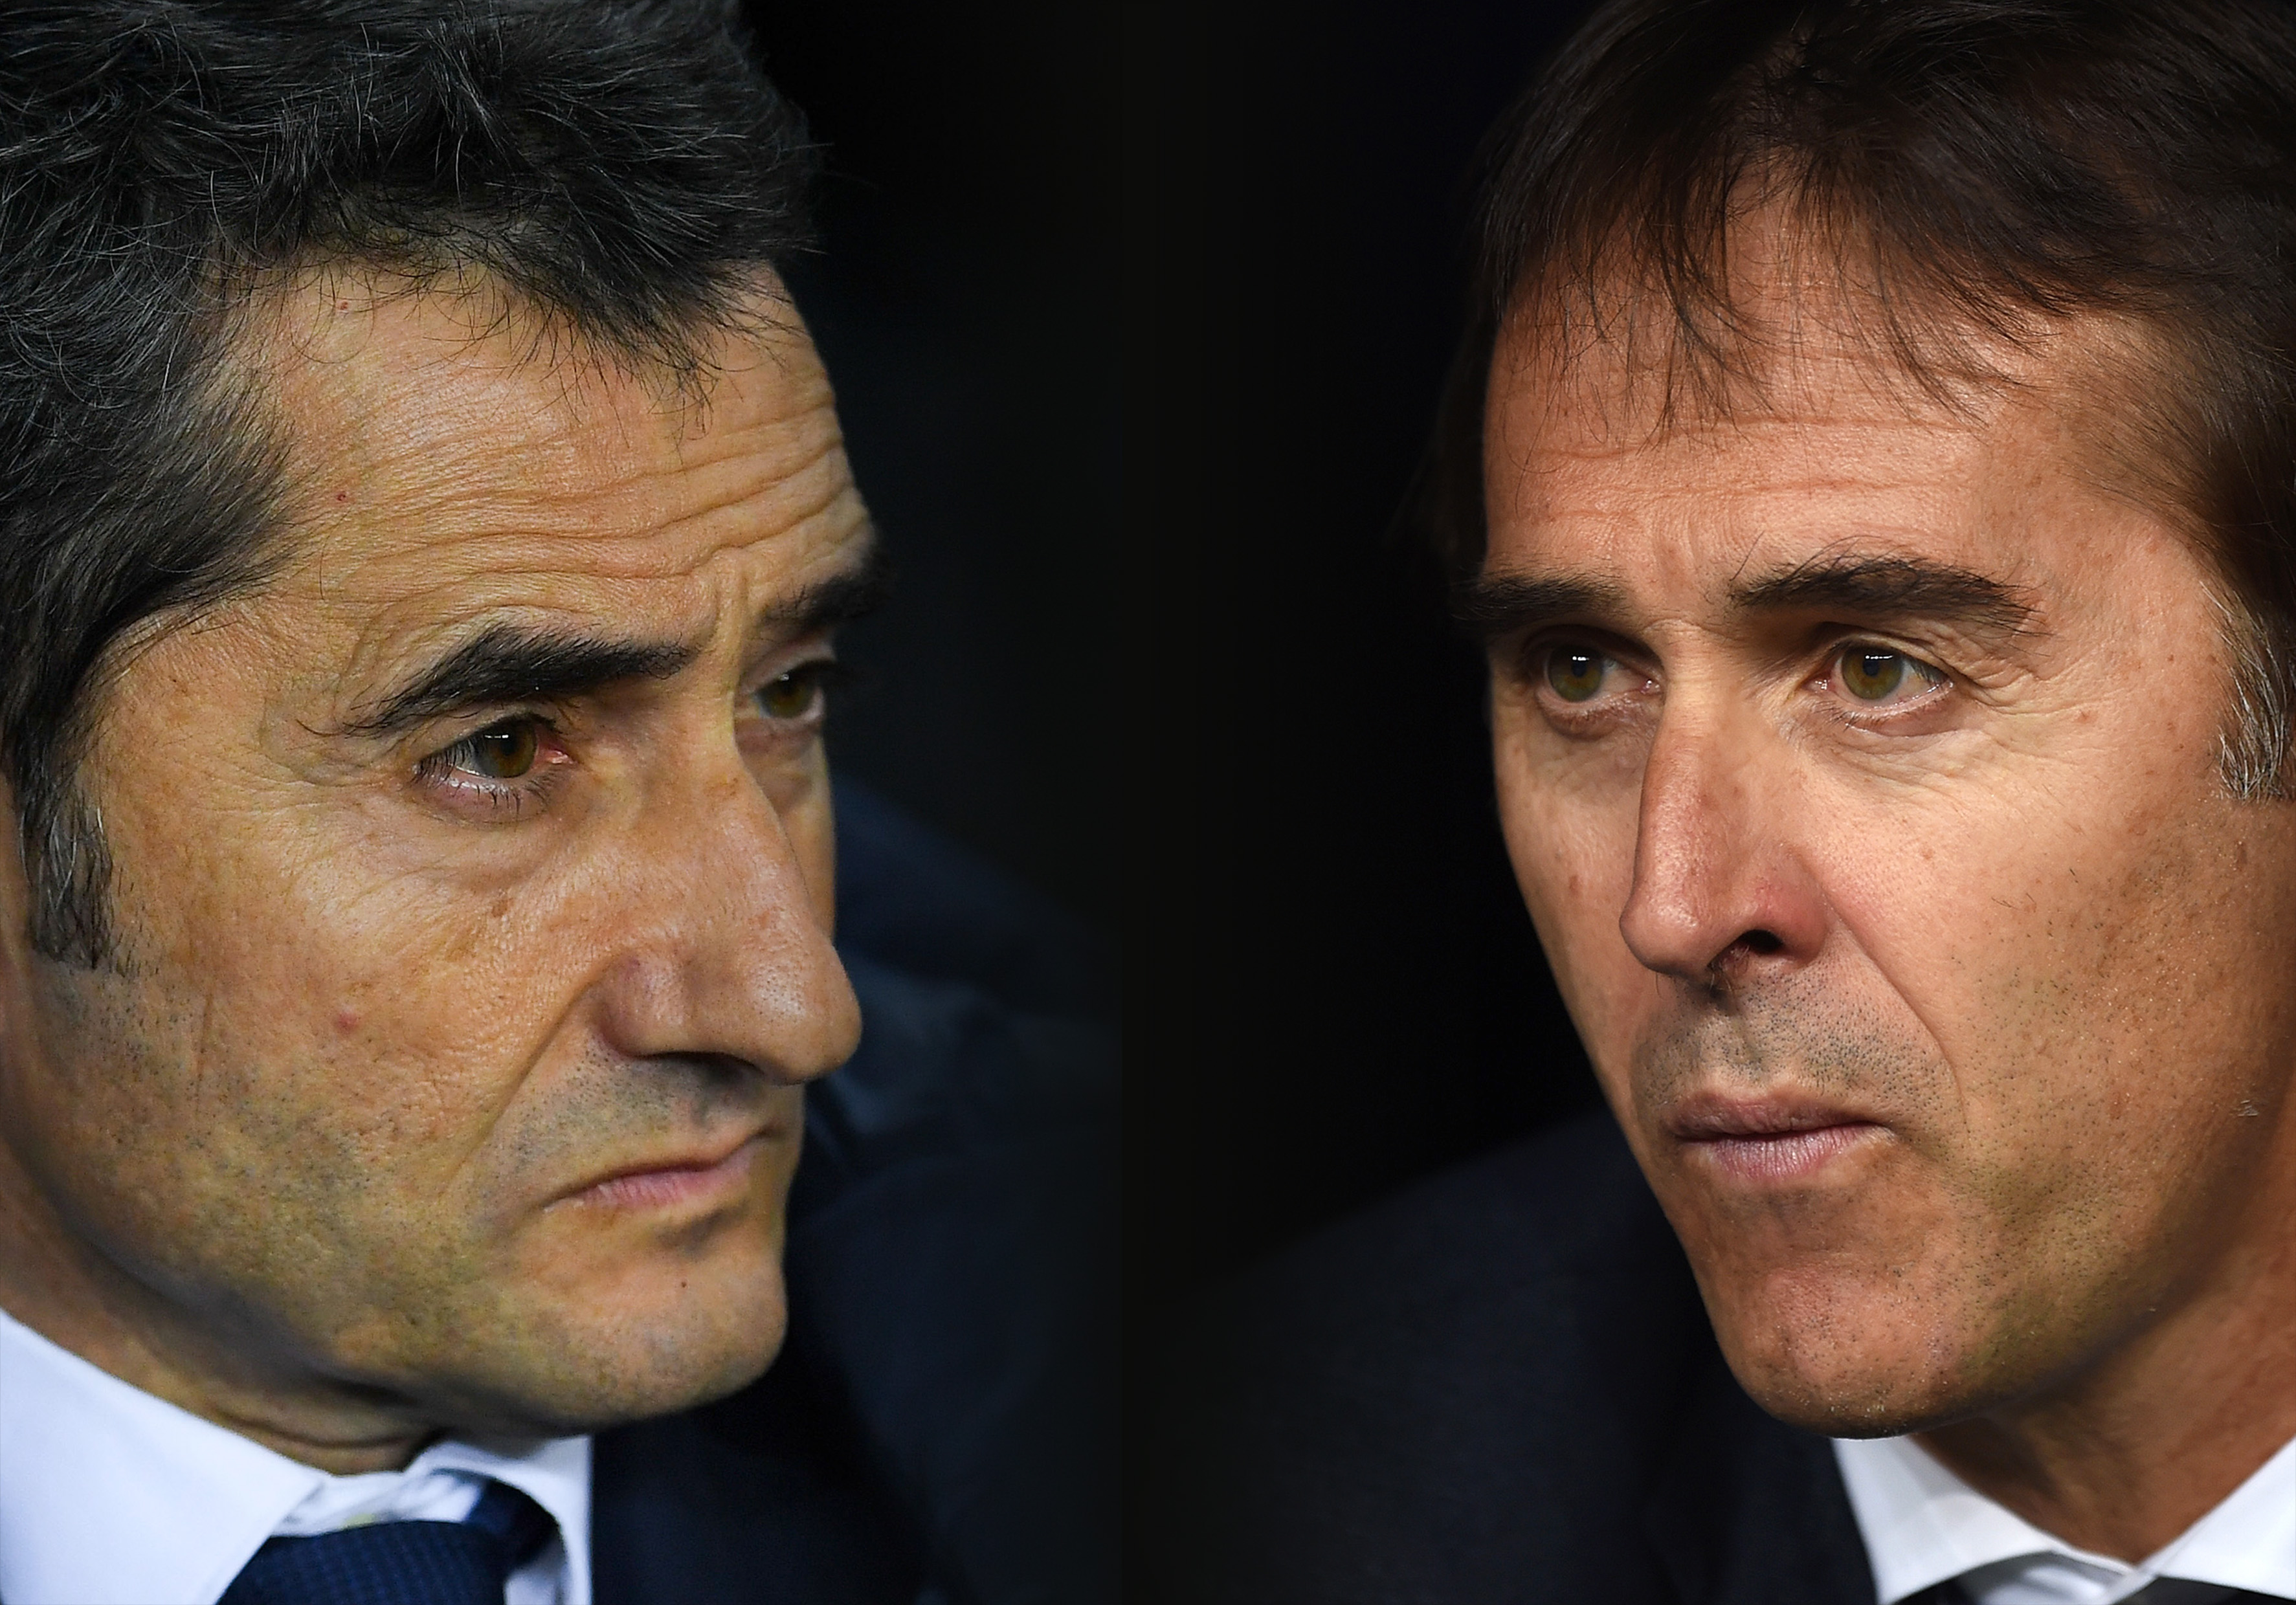 FILE PHOTO (EDITORS NOTE: COMPOSITE OF IMAGES - Image numbers 904100134,1038040072 - GRADIENT ADDED) In this composite image a comparison has been made between Head coach Ernesto Valverde of FC Barcelona  (L) and  Julen Lopetegui, head coach of Real Madrid. Barcelona and Real Madrid  meet in the first El Clásico of the season on October  28, 2018 in Barcelona,Spain. ***LEFT IMAGE*** BARCELONA, SPAIN - JANUARY 11: Head coach Ernesto Valverde of FC Barcelona looks on during the Copa del Rey round of 16 second leg match between FC Barcelona and Celta de Vigo at Camp Nou on January 11, 2018 in Barcelona, Spain. (Photo by David Ramos/Getty Images) ***RIGHT IMAGE*** MADRID, SPAIN - SEPTEMBER 22: Julen Lopetegui, head coach of Real Madrid looks out from the bench before the start of the La Liga match between Real Madrid CF and RCD Espanyol at Estadio Santiago Bernabeu on September 22, 2018 in Madrid, Spain. (Photo by Denis Doyle/Getty Images,)